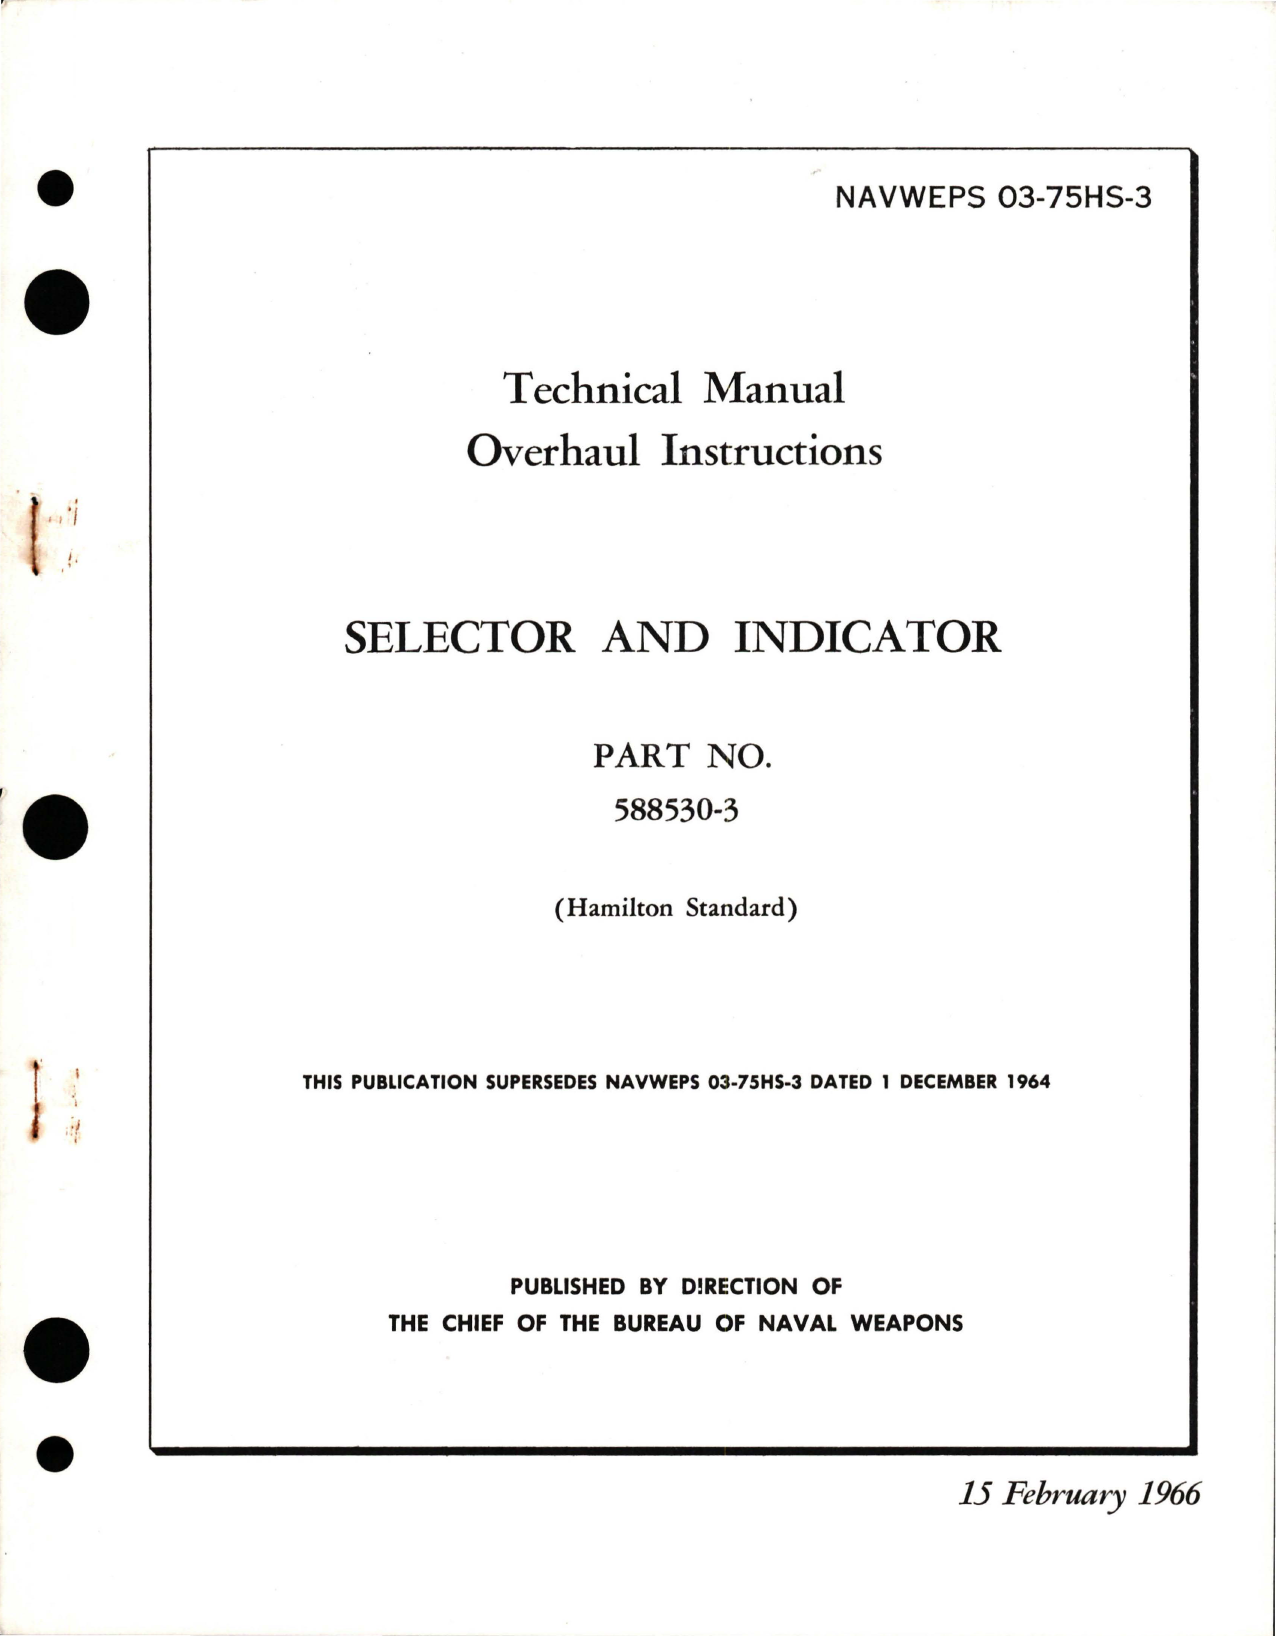 Sample page 1 from AirCorps Library document: Overhaul Instructions for Selector and Indicator - Part 588530-3 